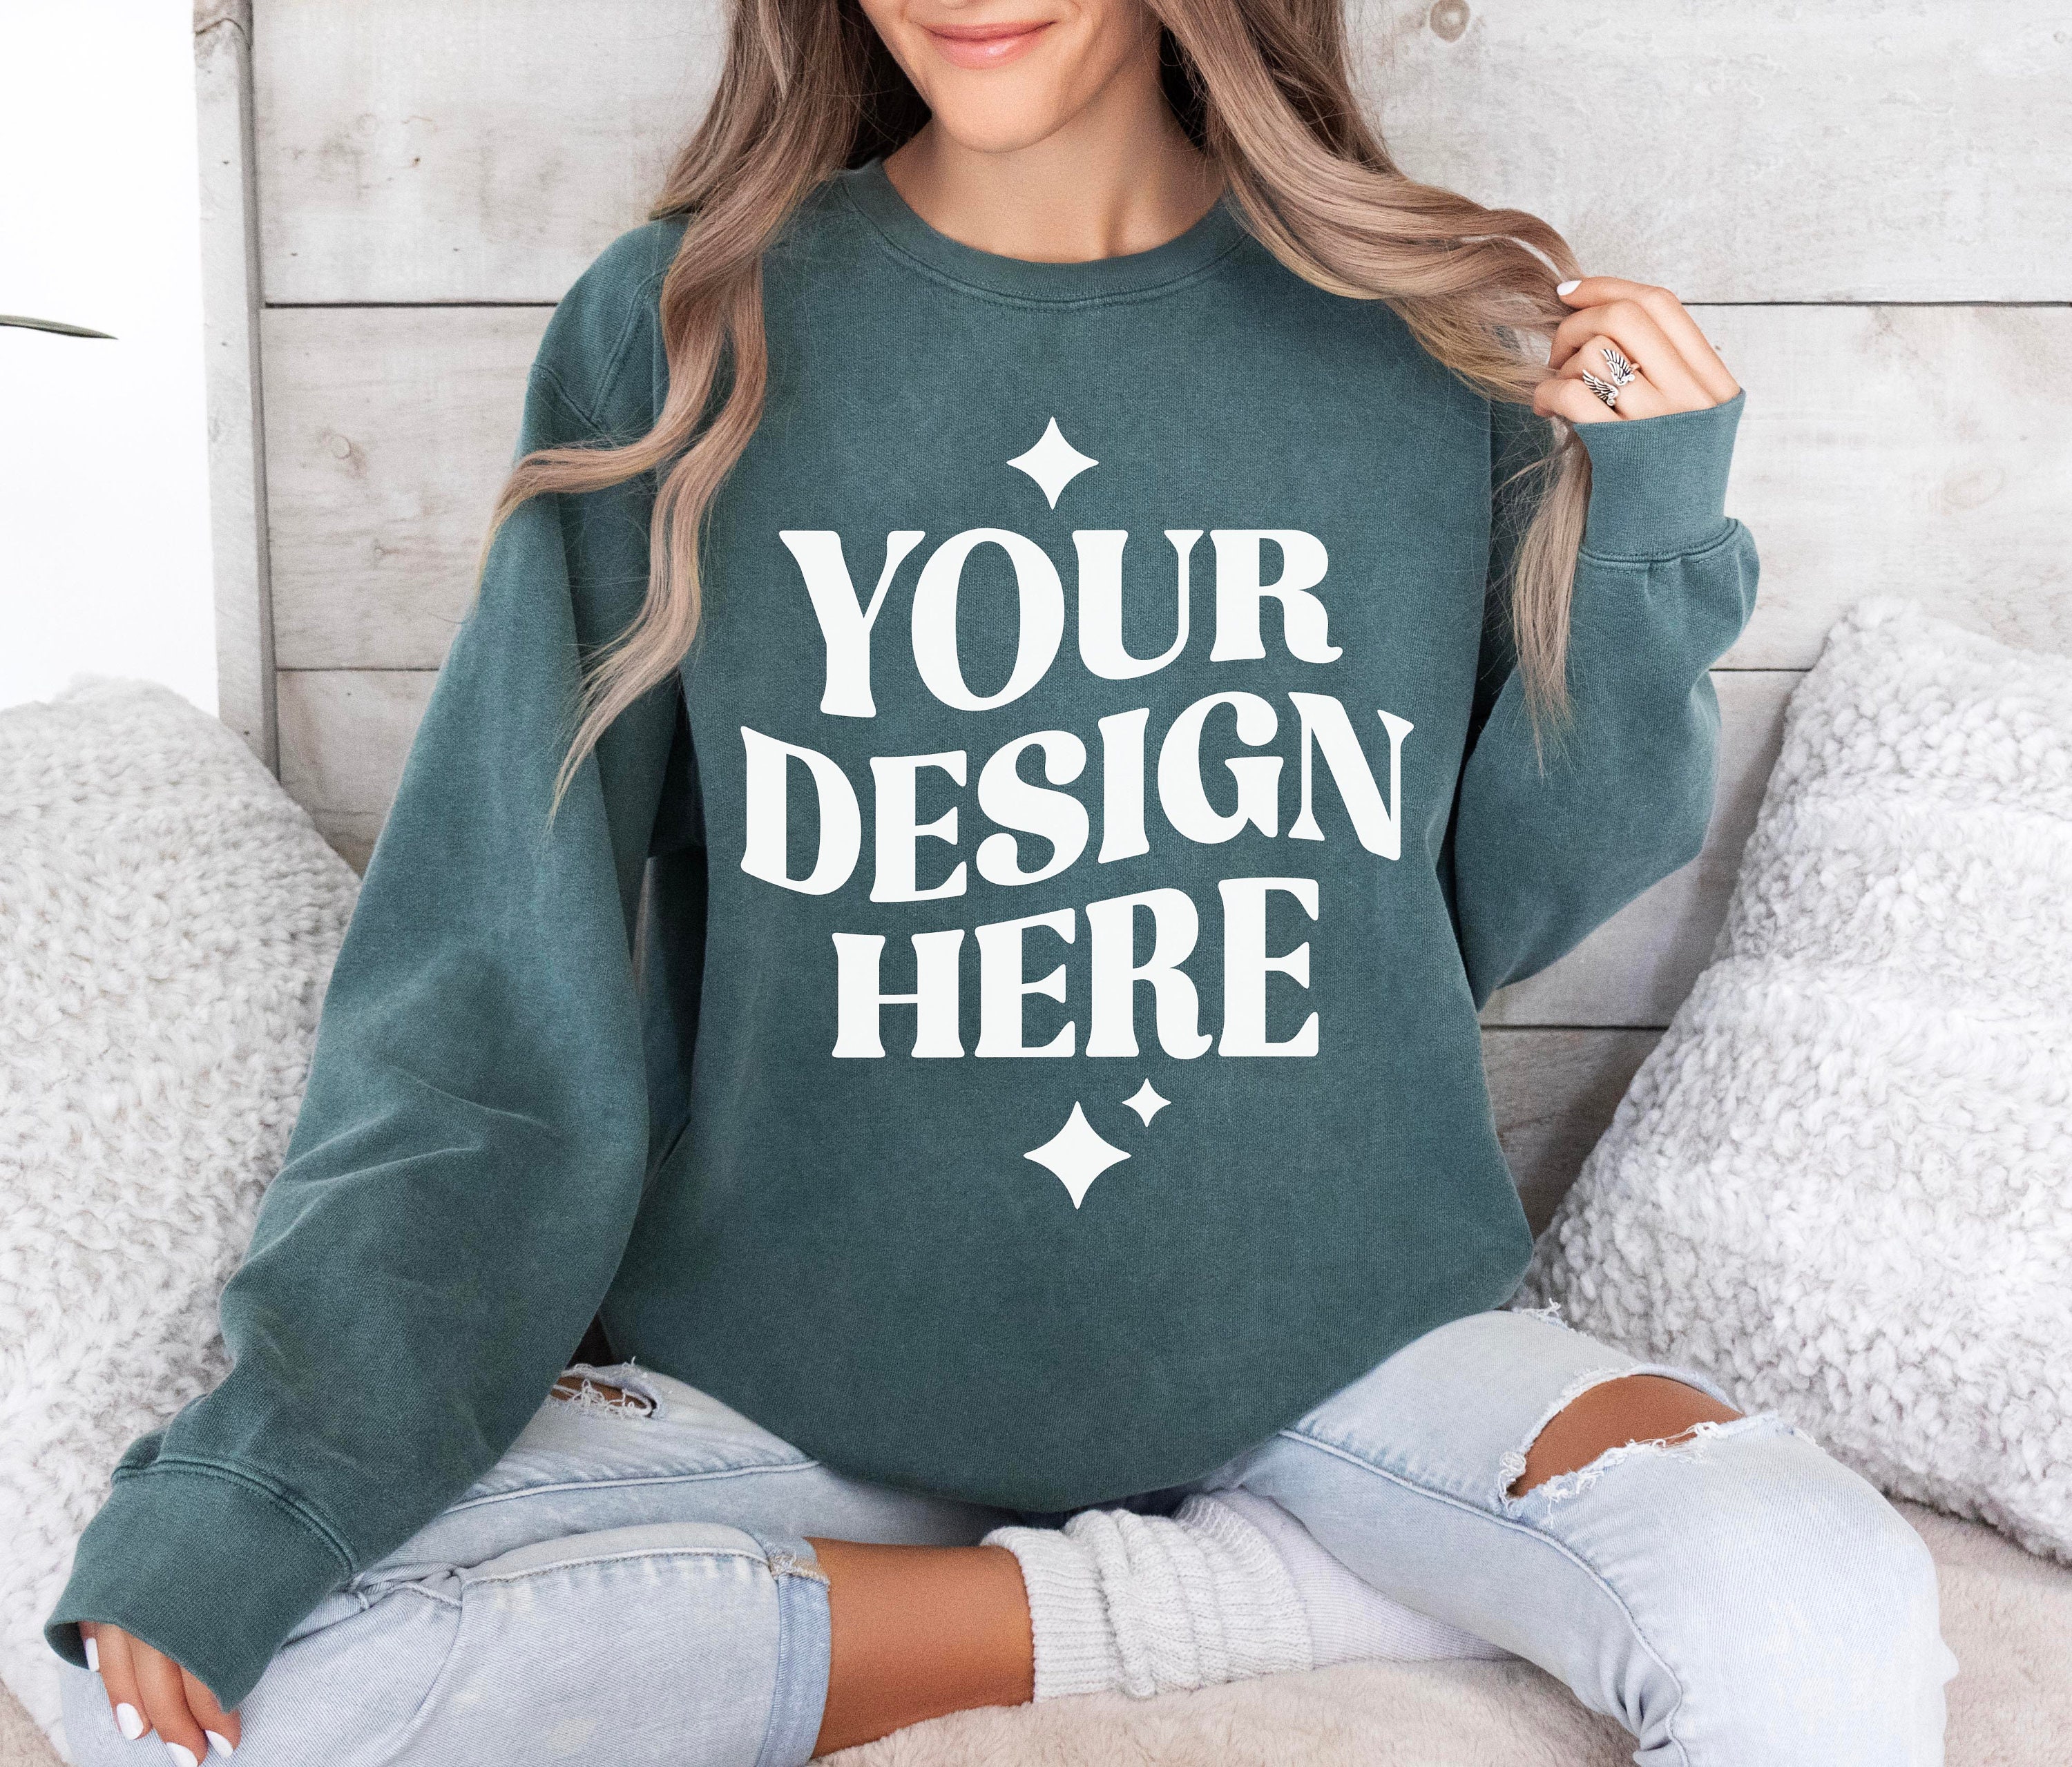 Long Sleeve Personalized Comfort Color Pocket Tee – Glittering